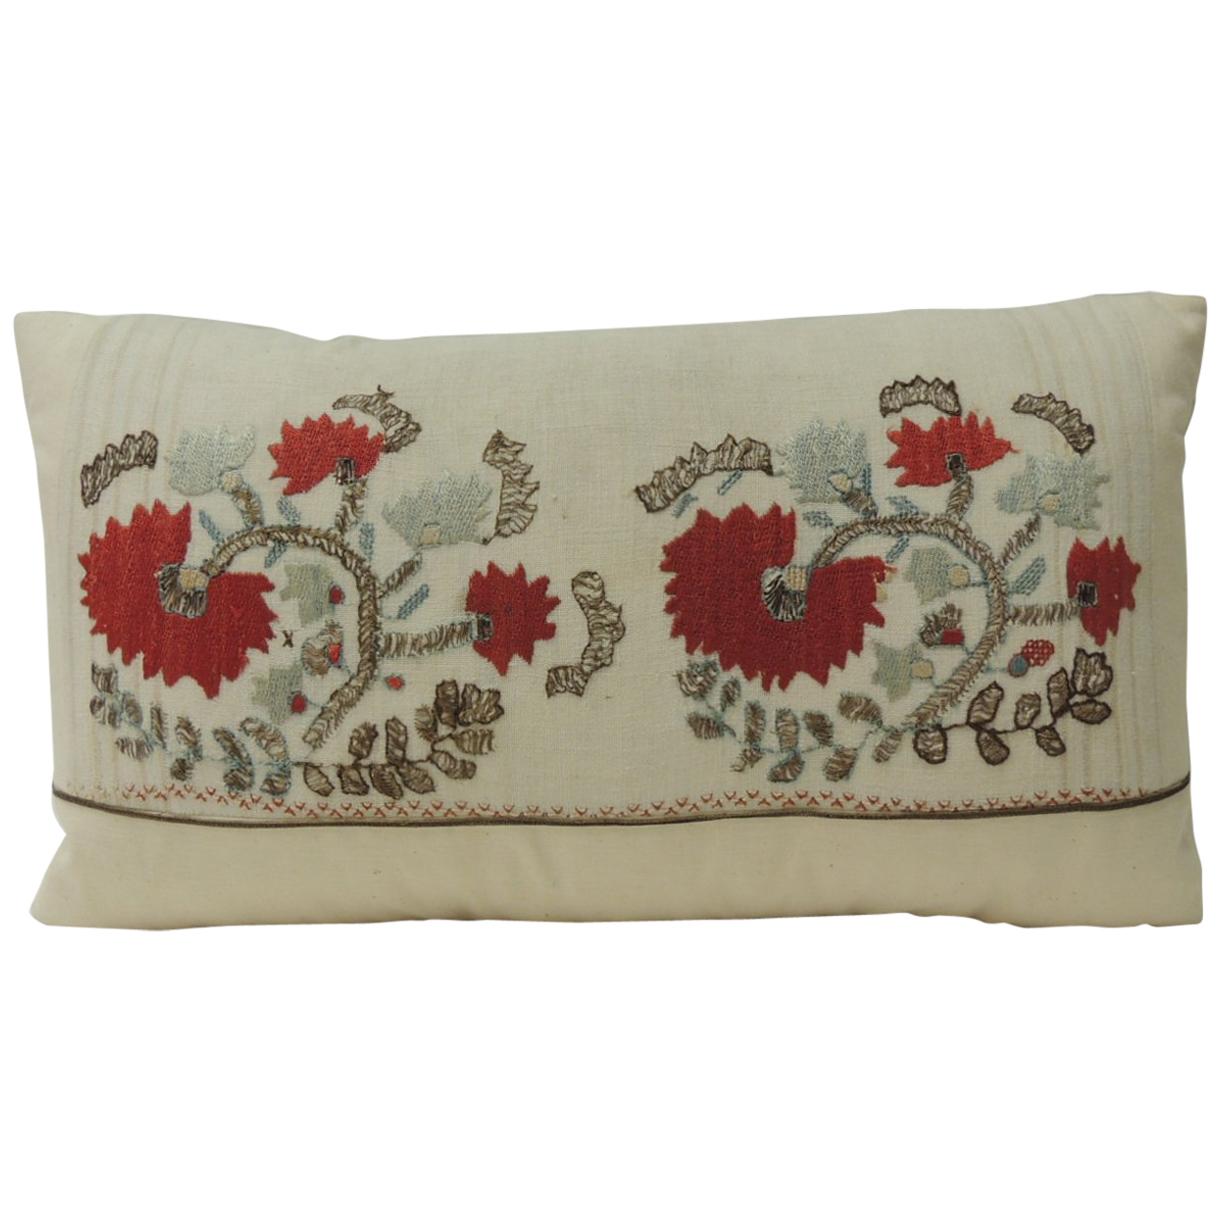 19th Century Red and Green Turkish Embroidery Lumbar Decorative Pillow